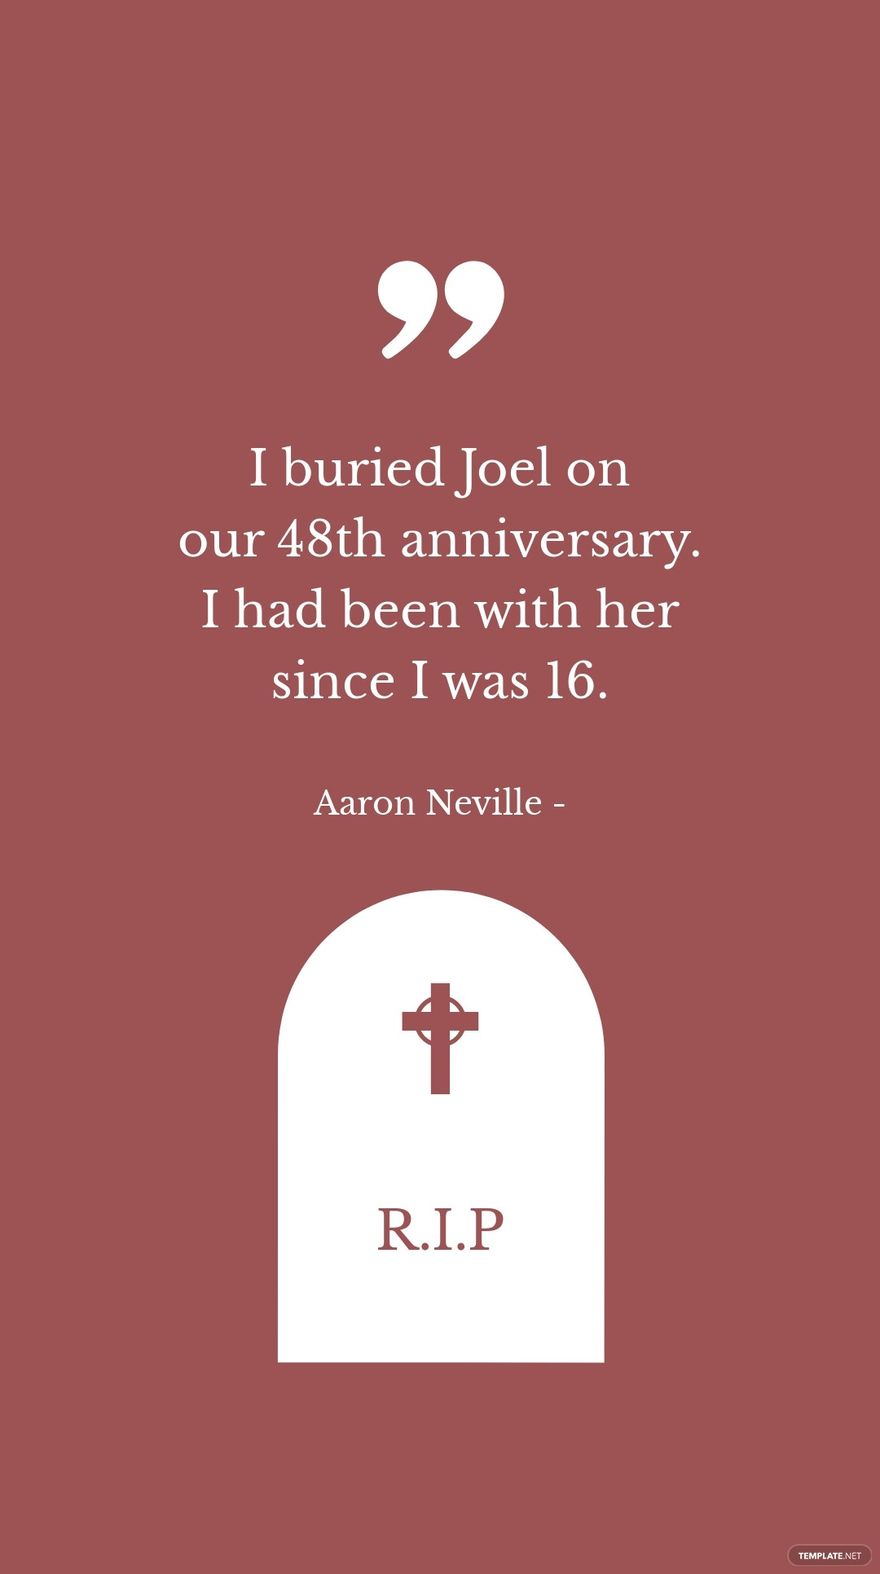 Aaron Neville - I buried Joel on our 48th anniversary. I had been with her since I was 16. in JPG